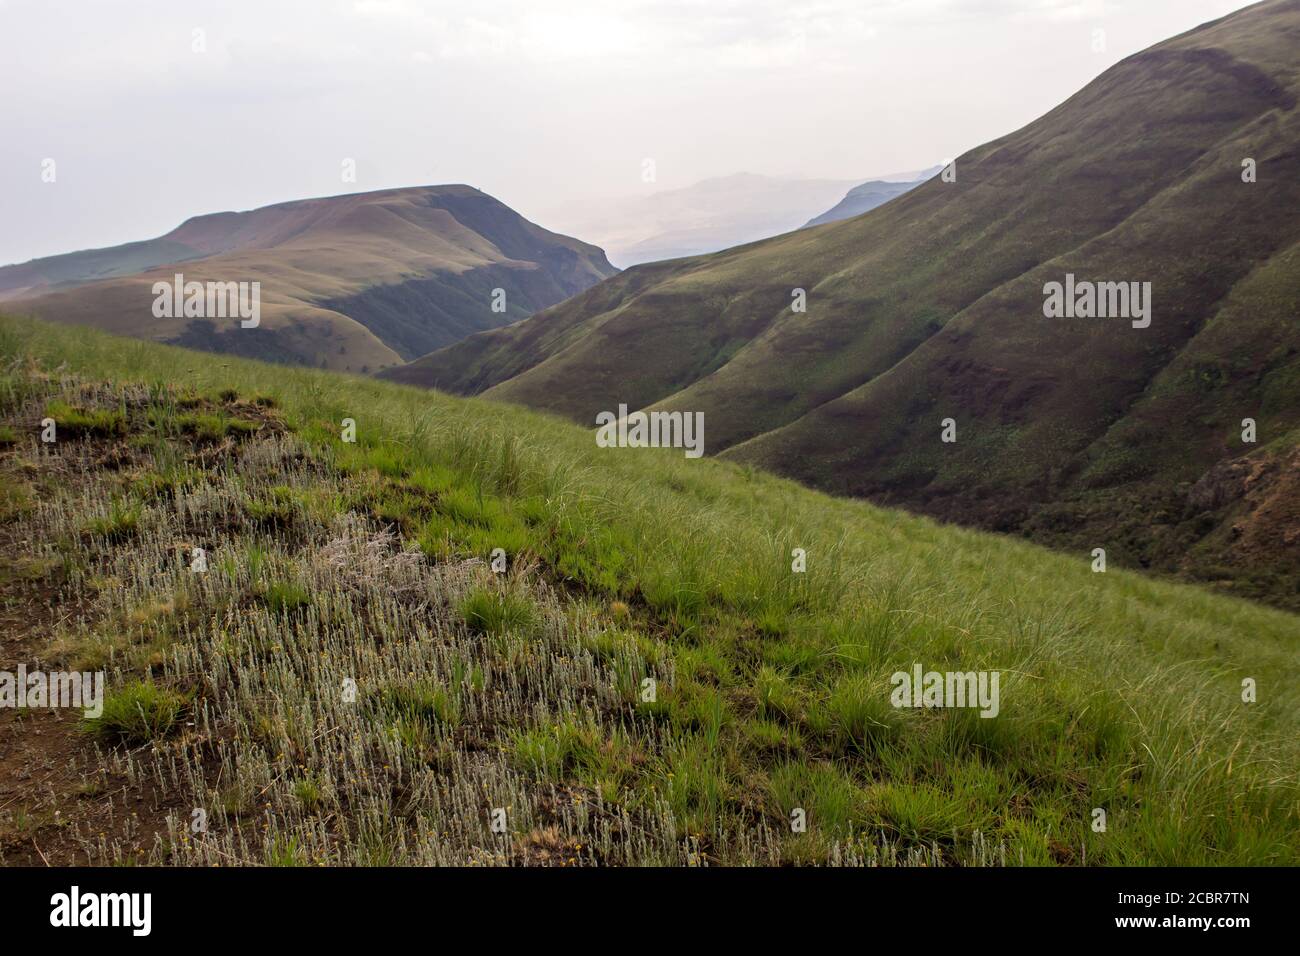 View over the grass covered slopes of the Drakensberg Mountains South Africa Stock Photo